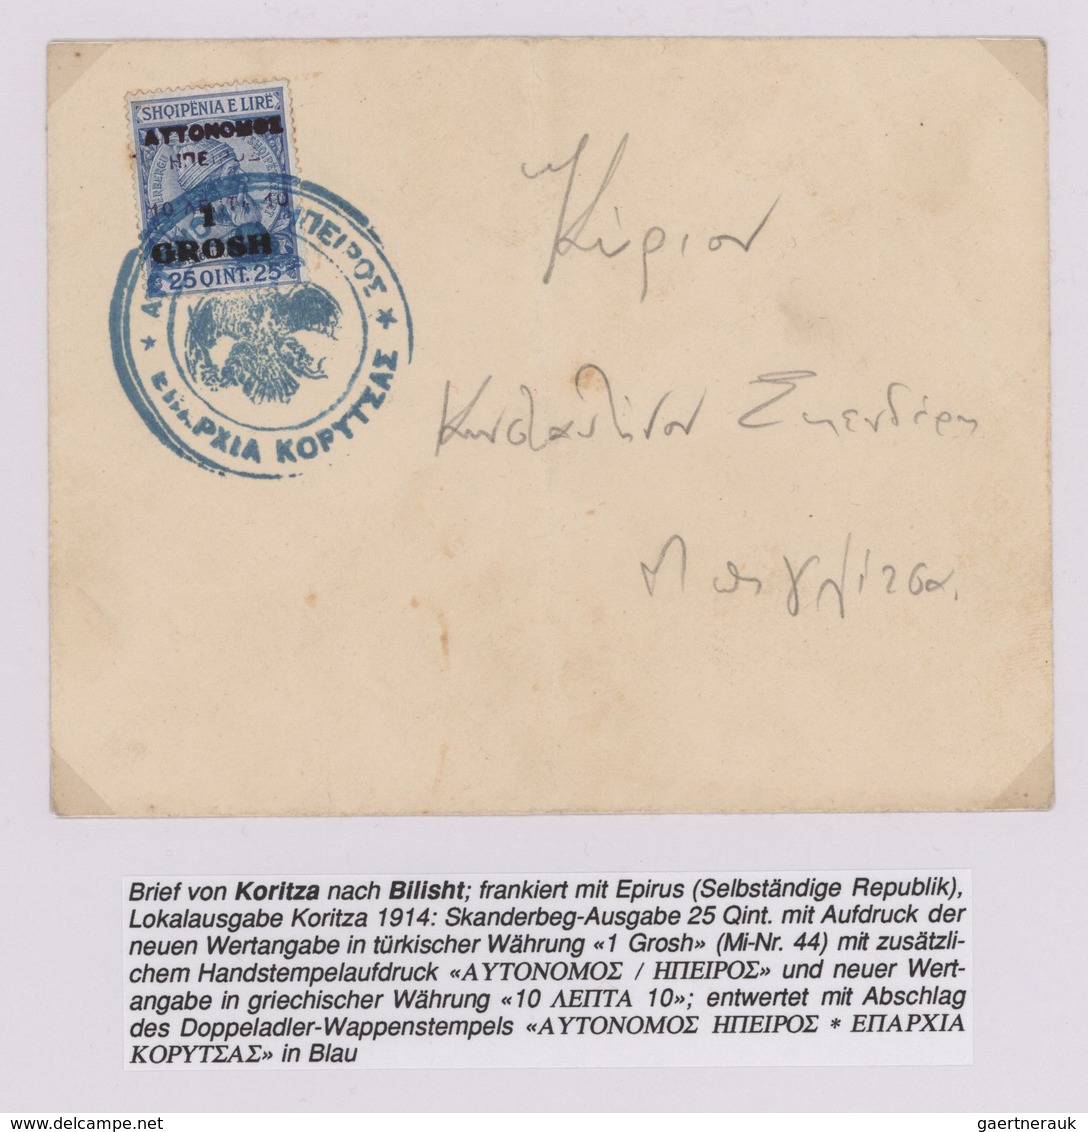 Epirus: 1914, comprehensive collection of Epirus Local Stamps, comprising the so-called 'MOSHOPOLIS"